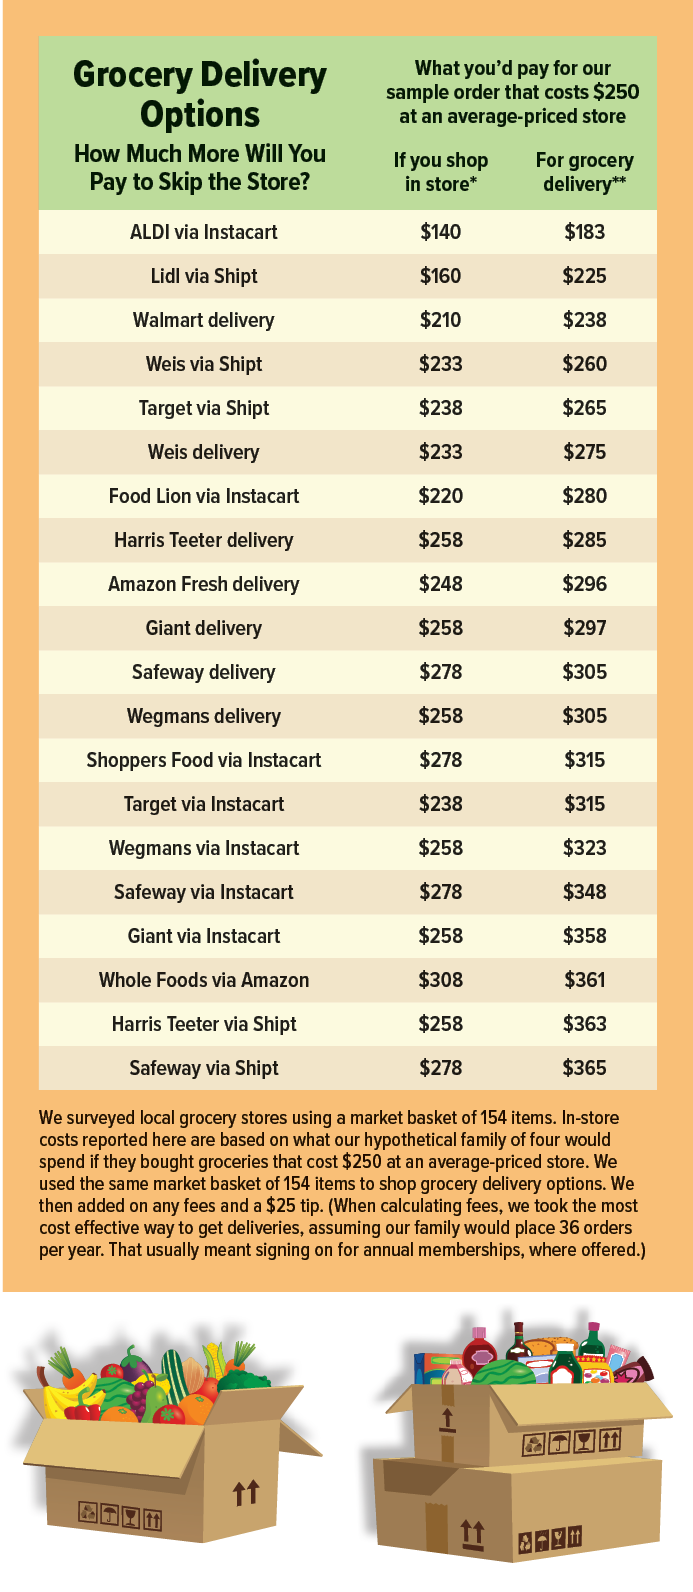 https://www.checkbook.org/V2/graphics/articles/Supermarkets/W_how_much_grocery_delivery_costs.png